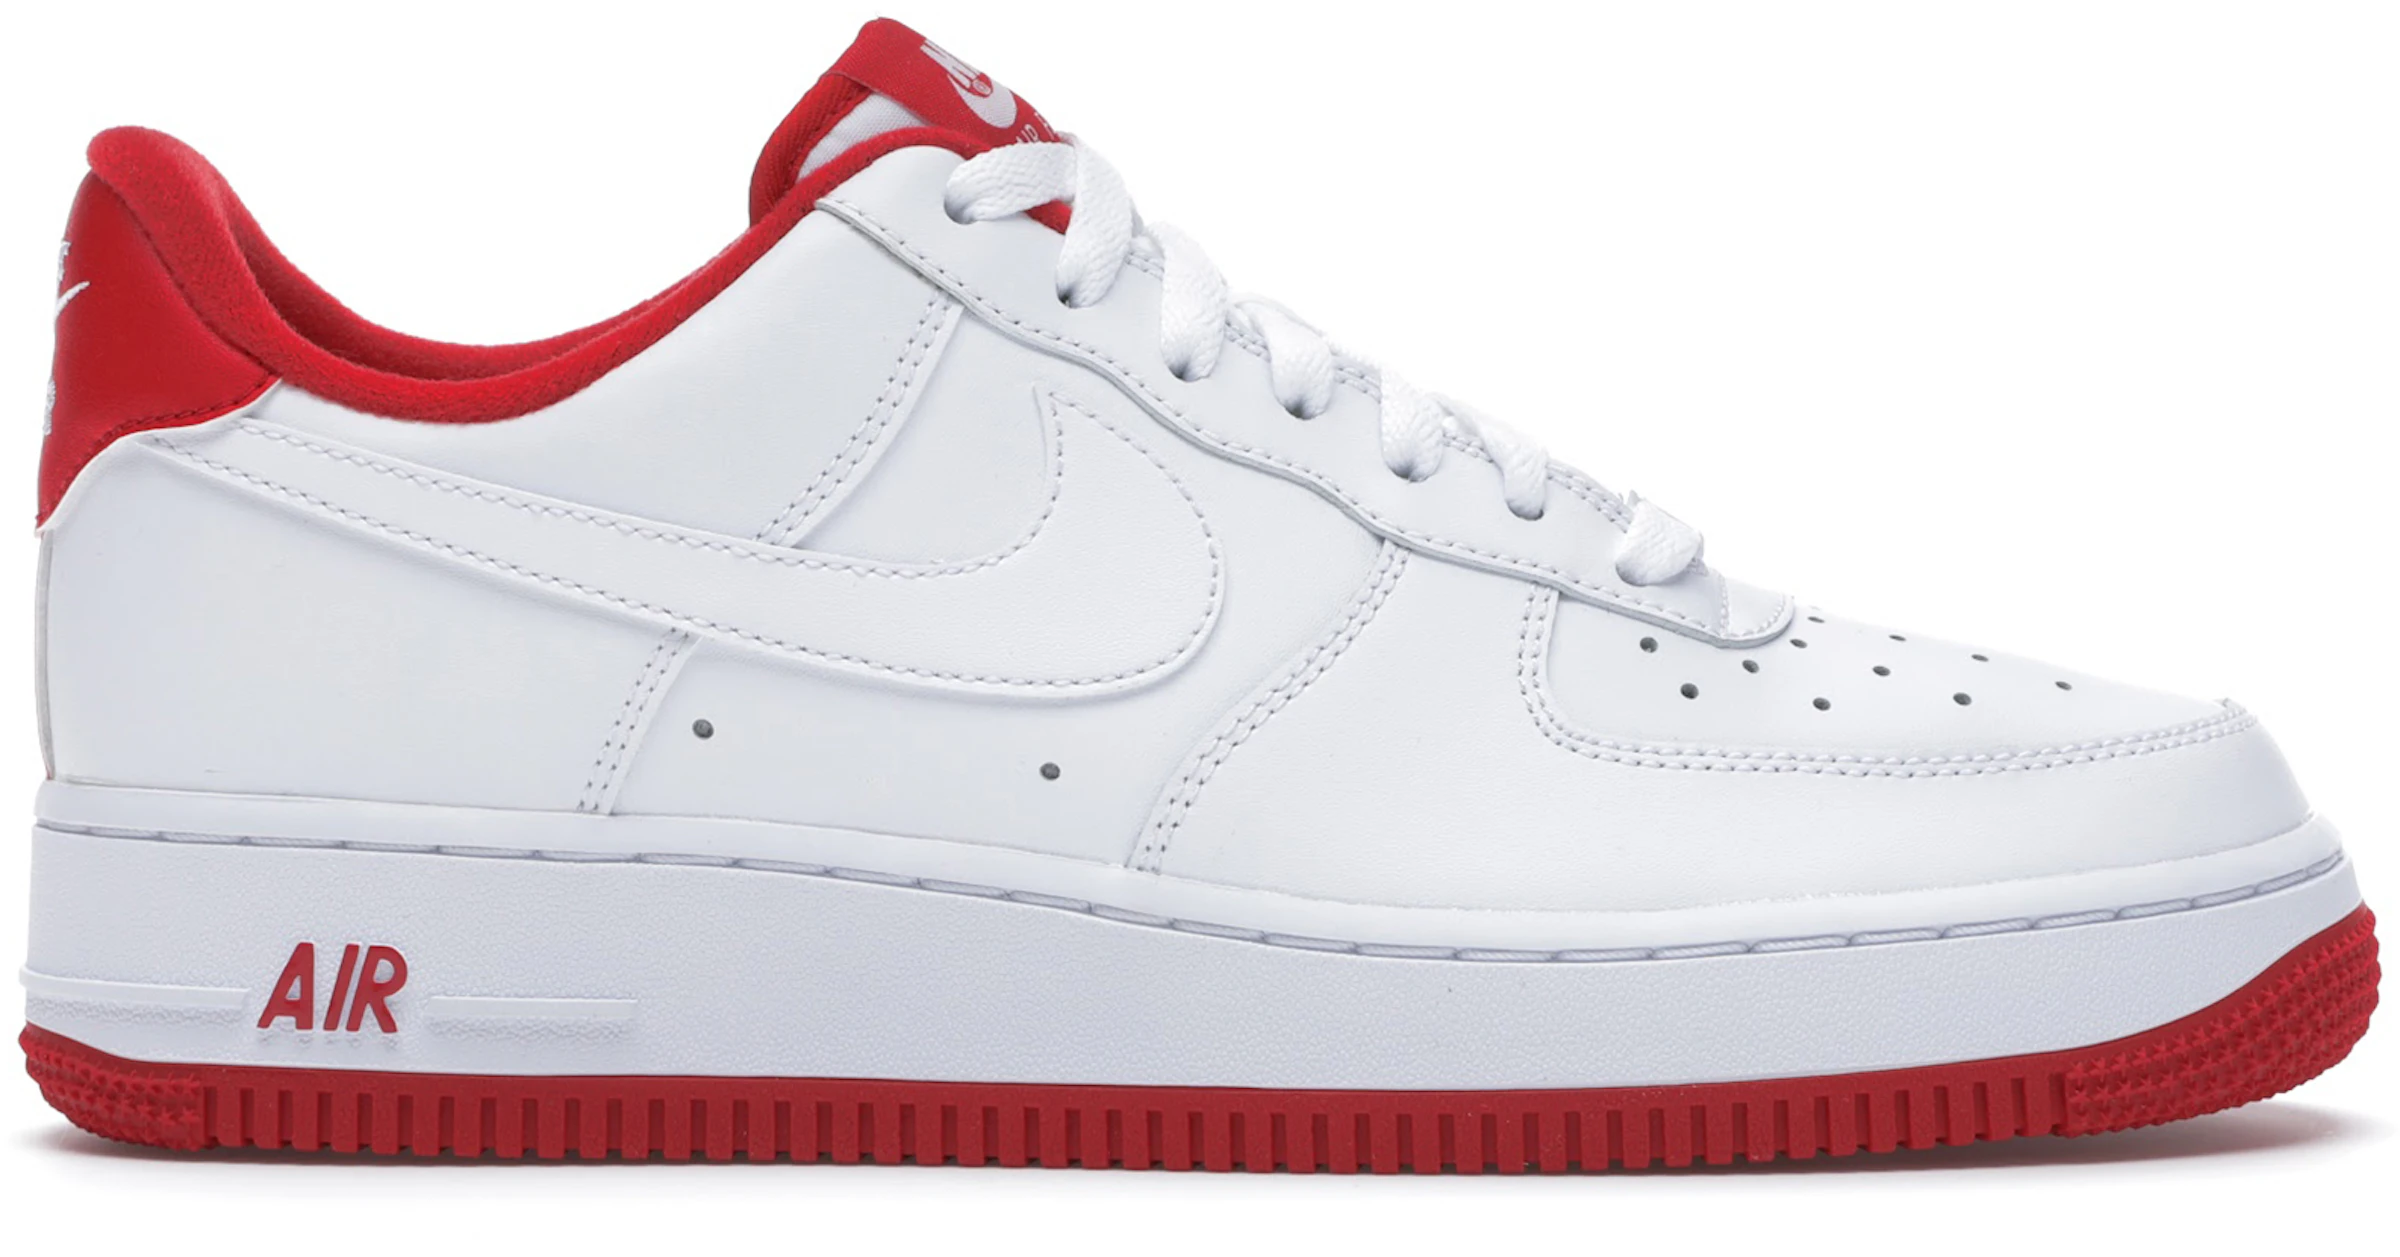 Plano inferencia inoxidable Nike Air Force 1 Low White University Red - CD0884-101 - ES